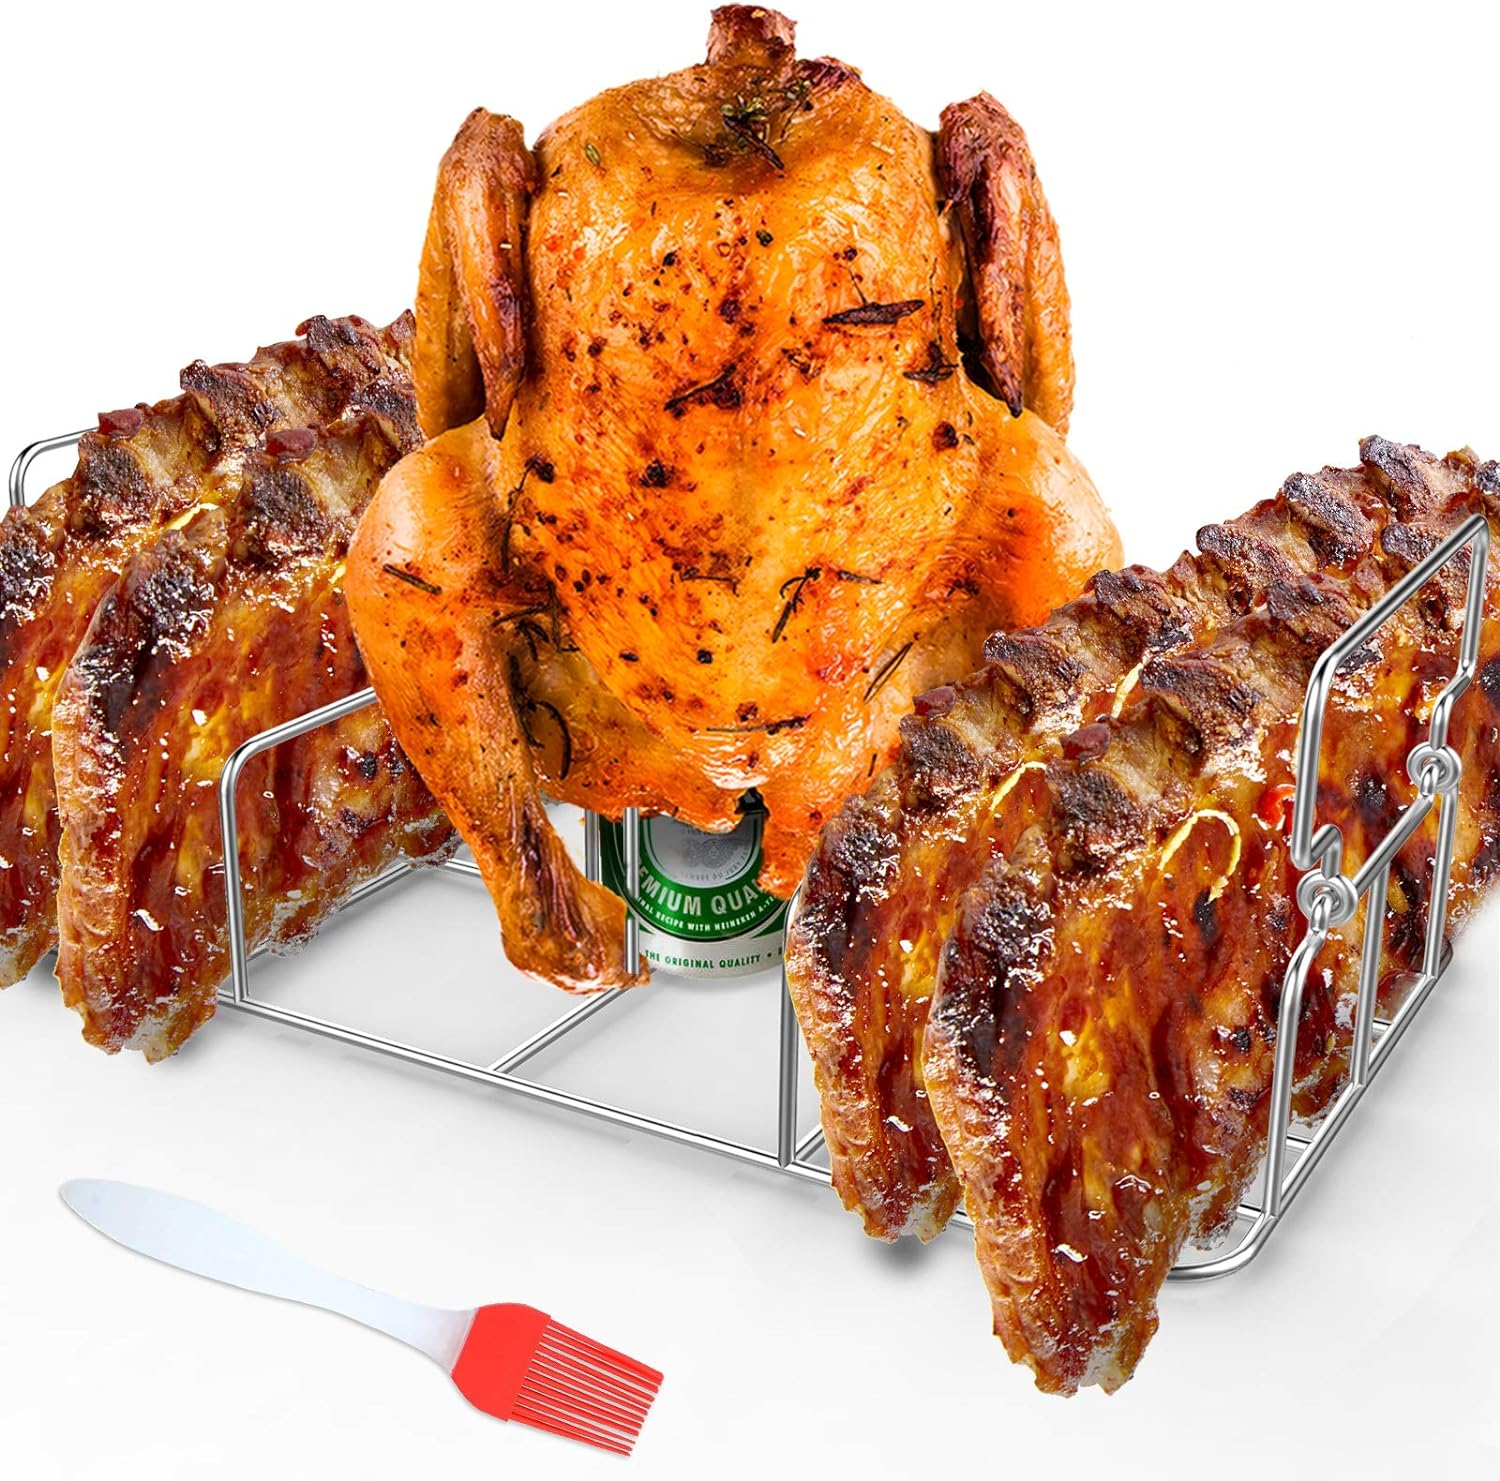 Durable Stainless Steel Rib Rack with a Silicone Oil Brush, BBQ Stand with 2 Handle for Smoker,Oven and Grill, Cook up to 5 Ribs at a time